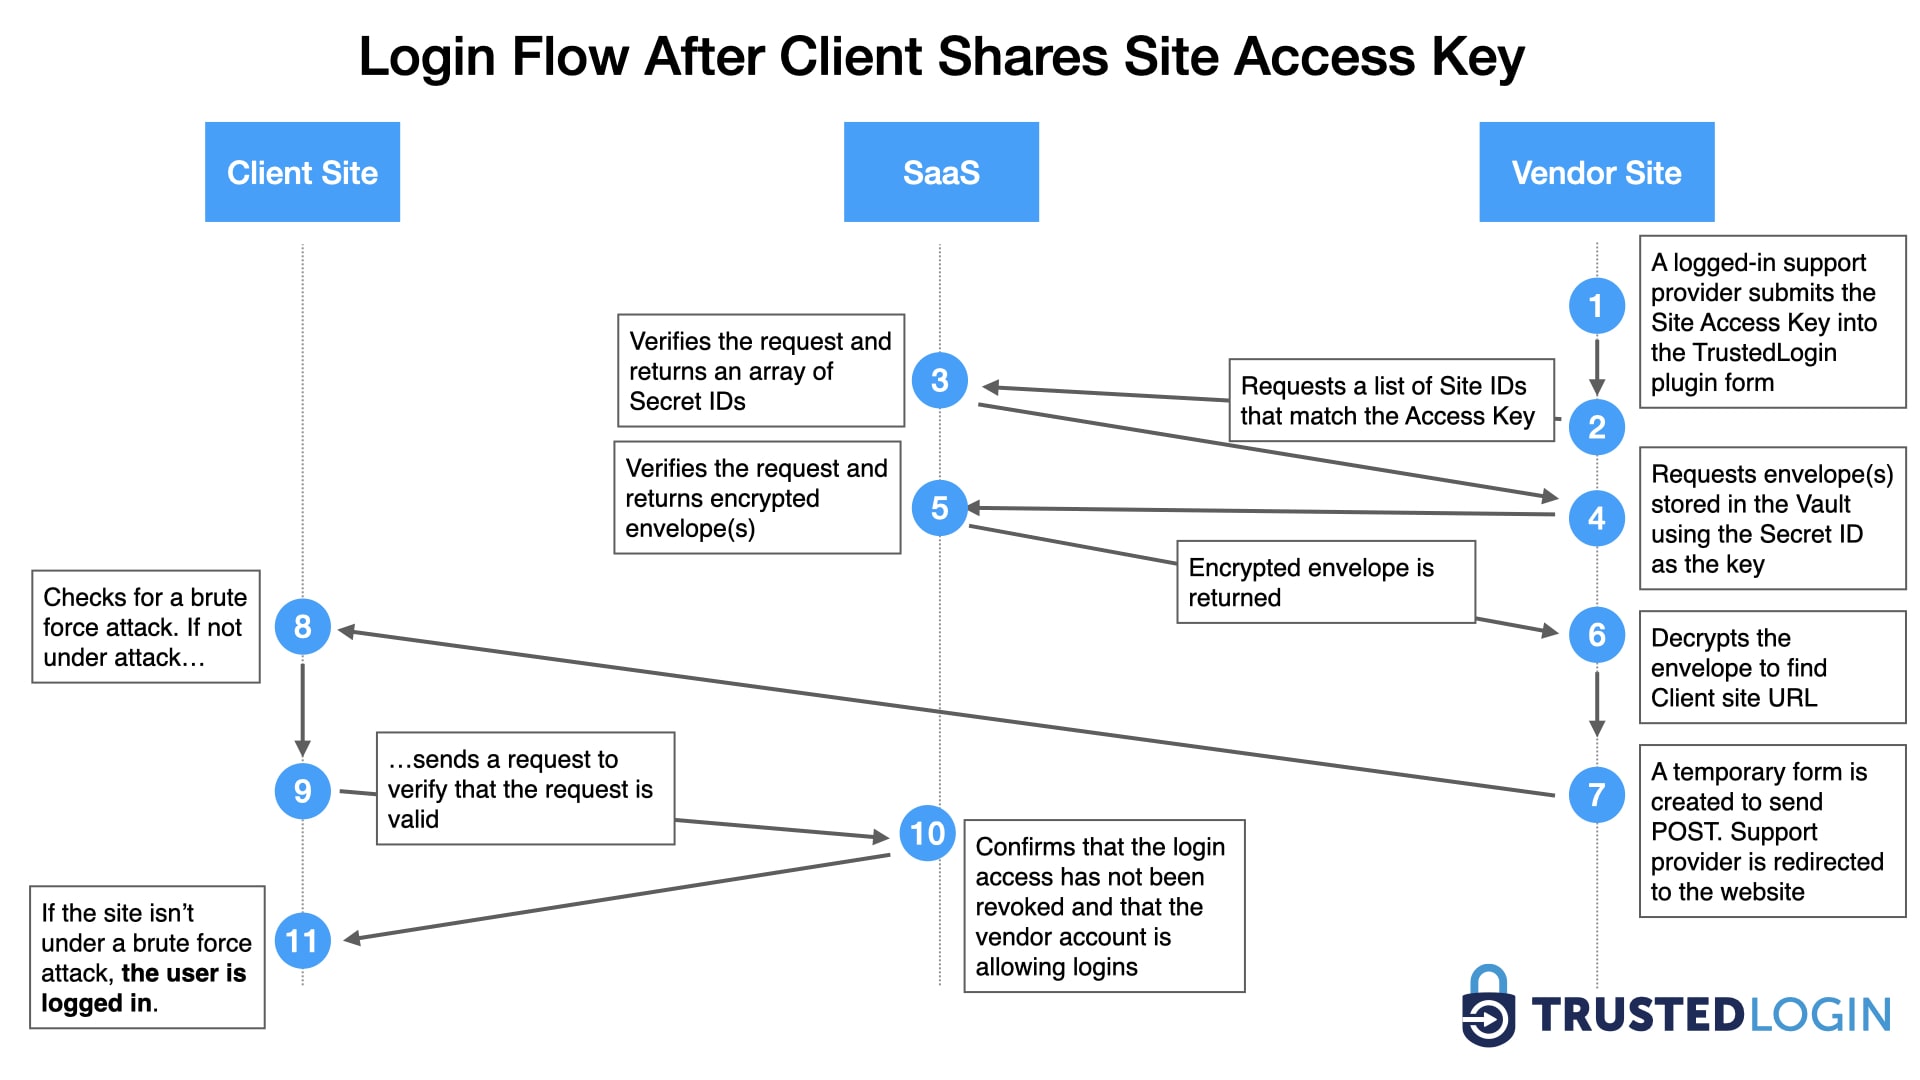 Swimlane diagram of the login flow for accessing a client website